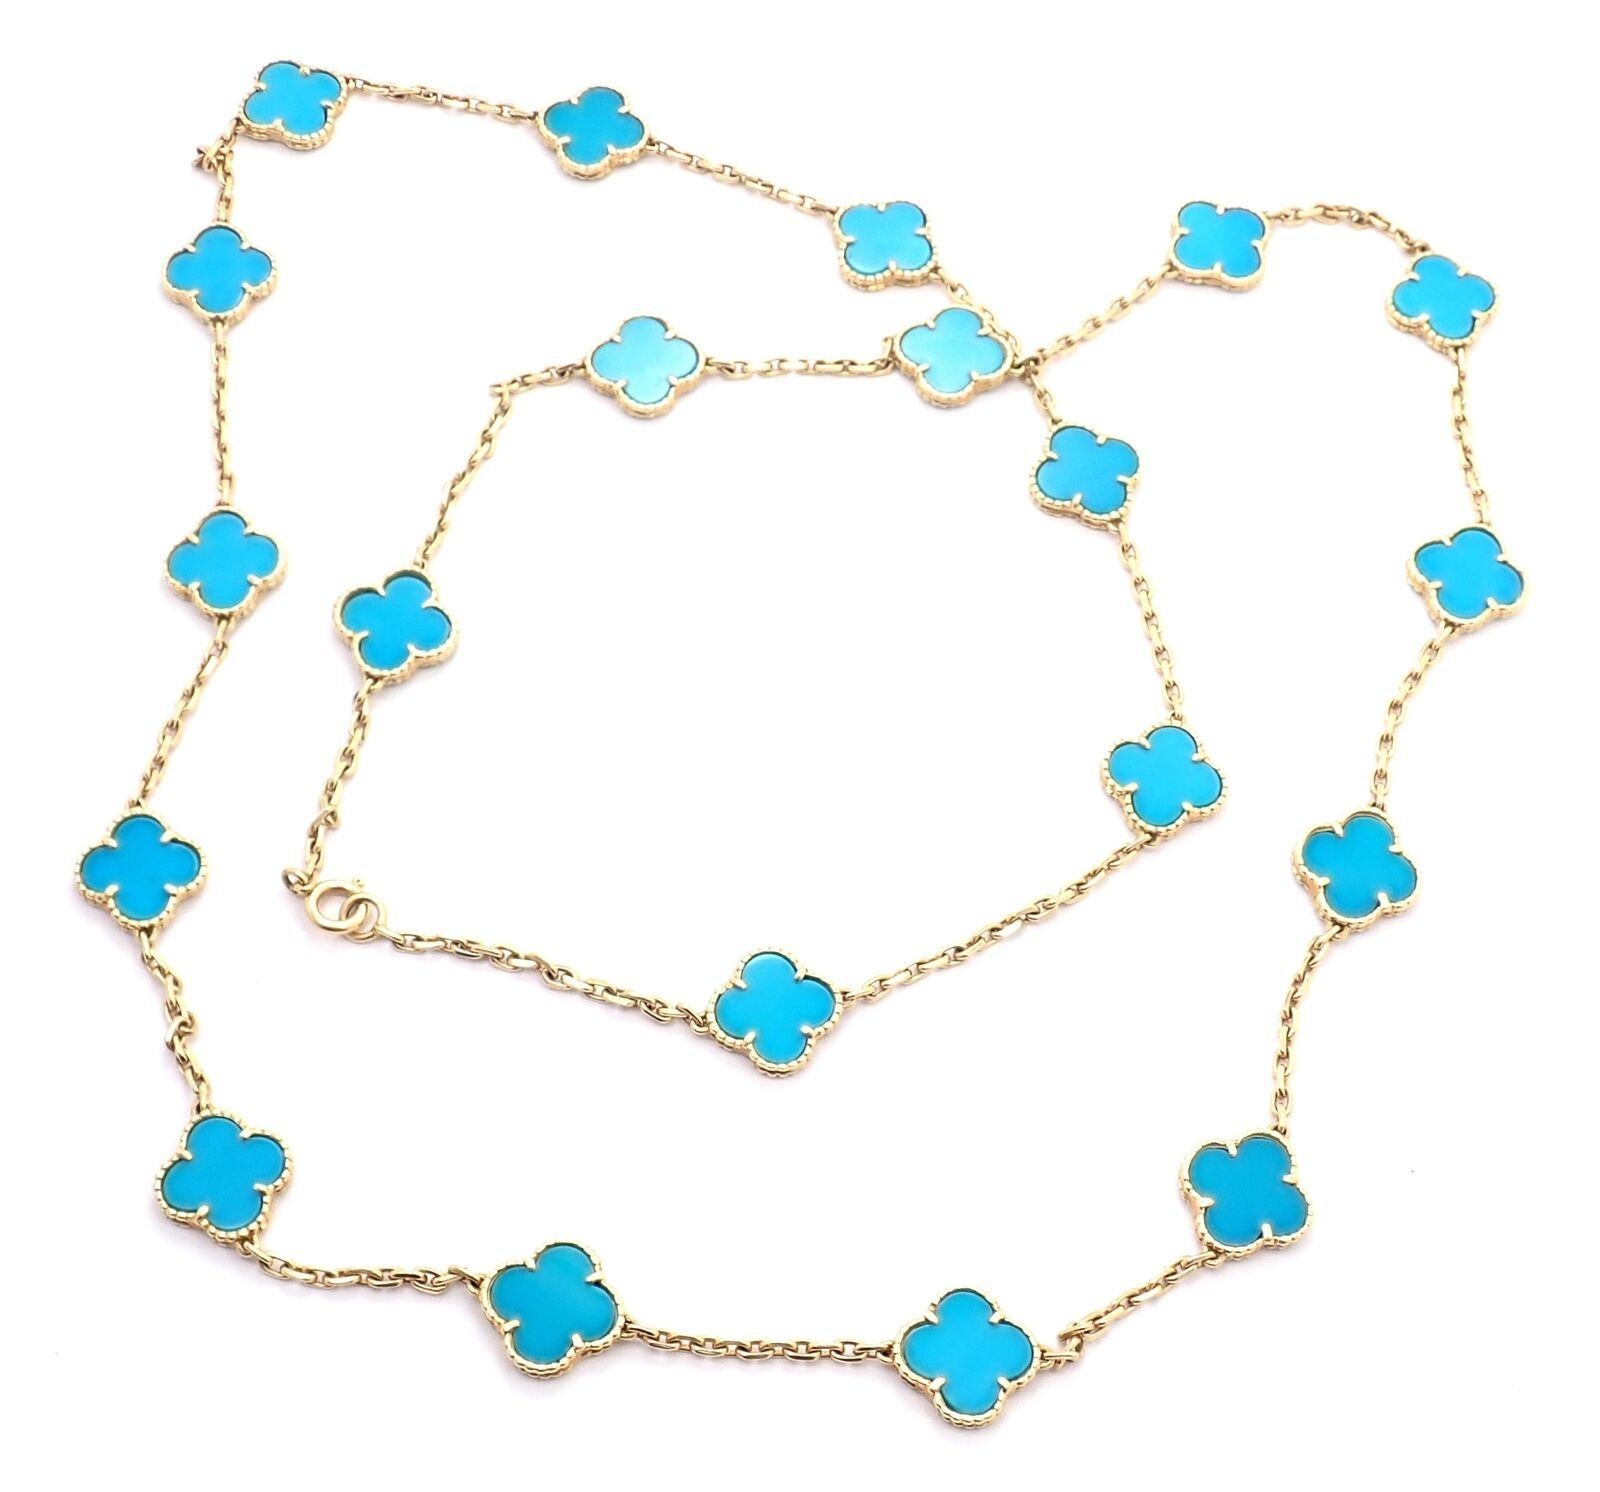 18k Yellow Gold Alhambra 20 Motifs Turquoise Necklace by Van Cleef & Arpels. 
*** This is an extremely rare, highly collectible turquoise alhambra 35.5